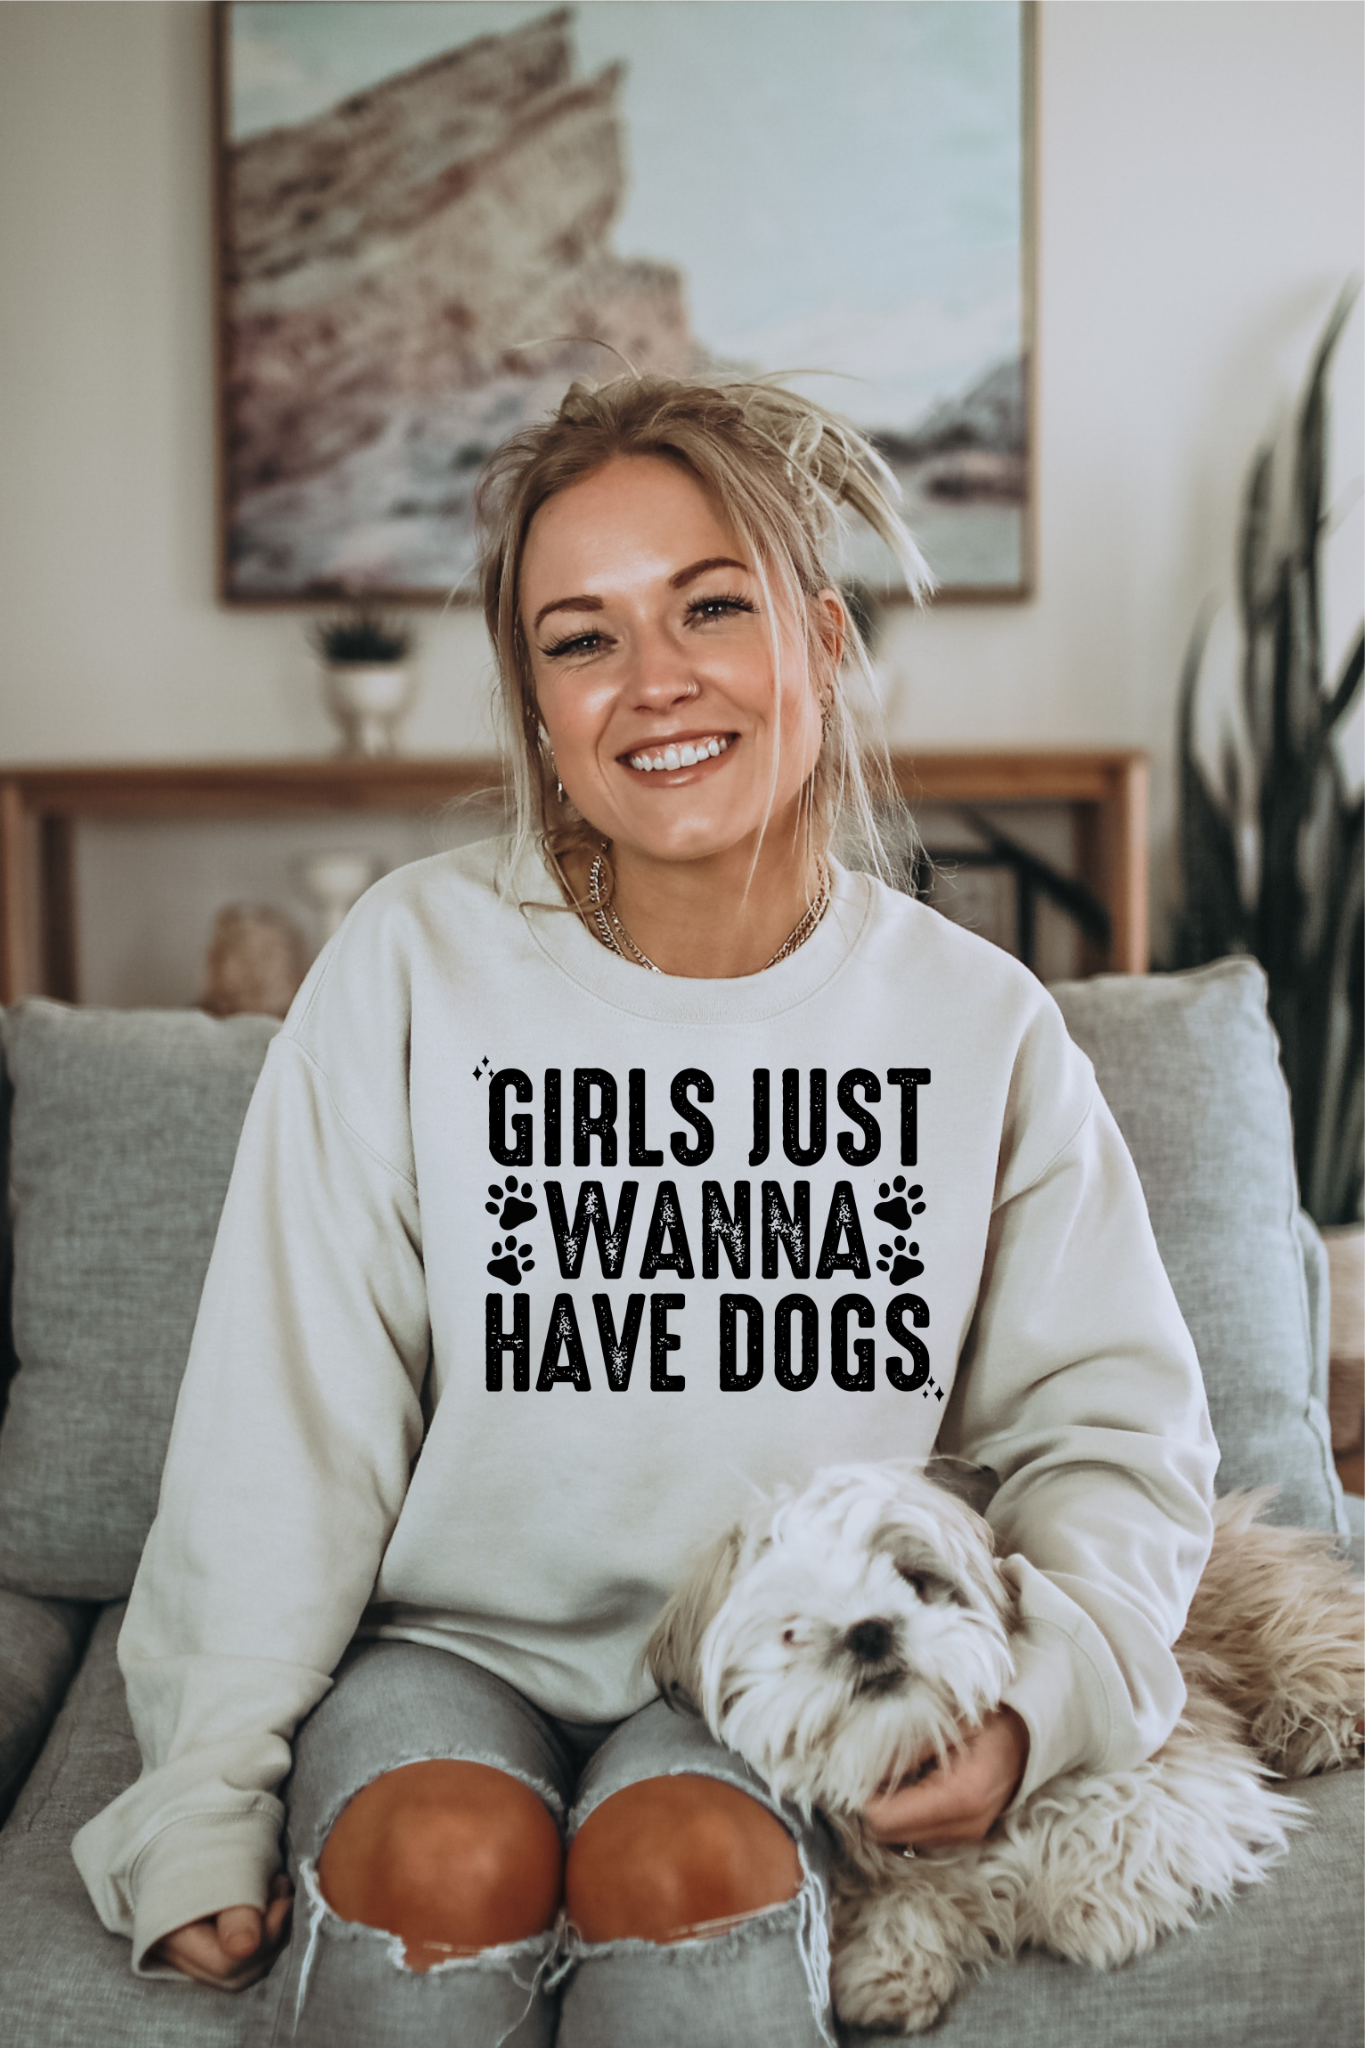 Girls just wanna have dogs